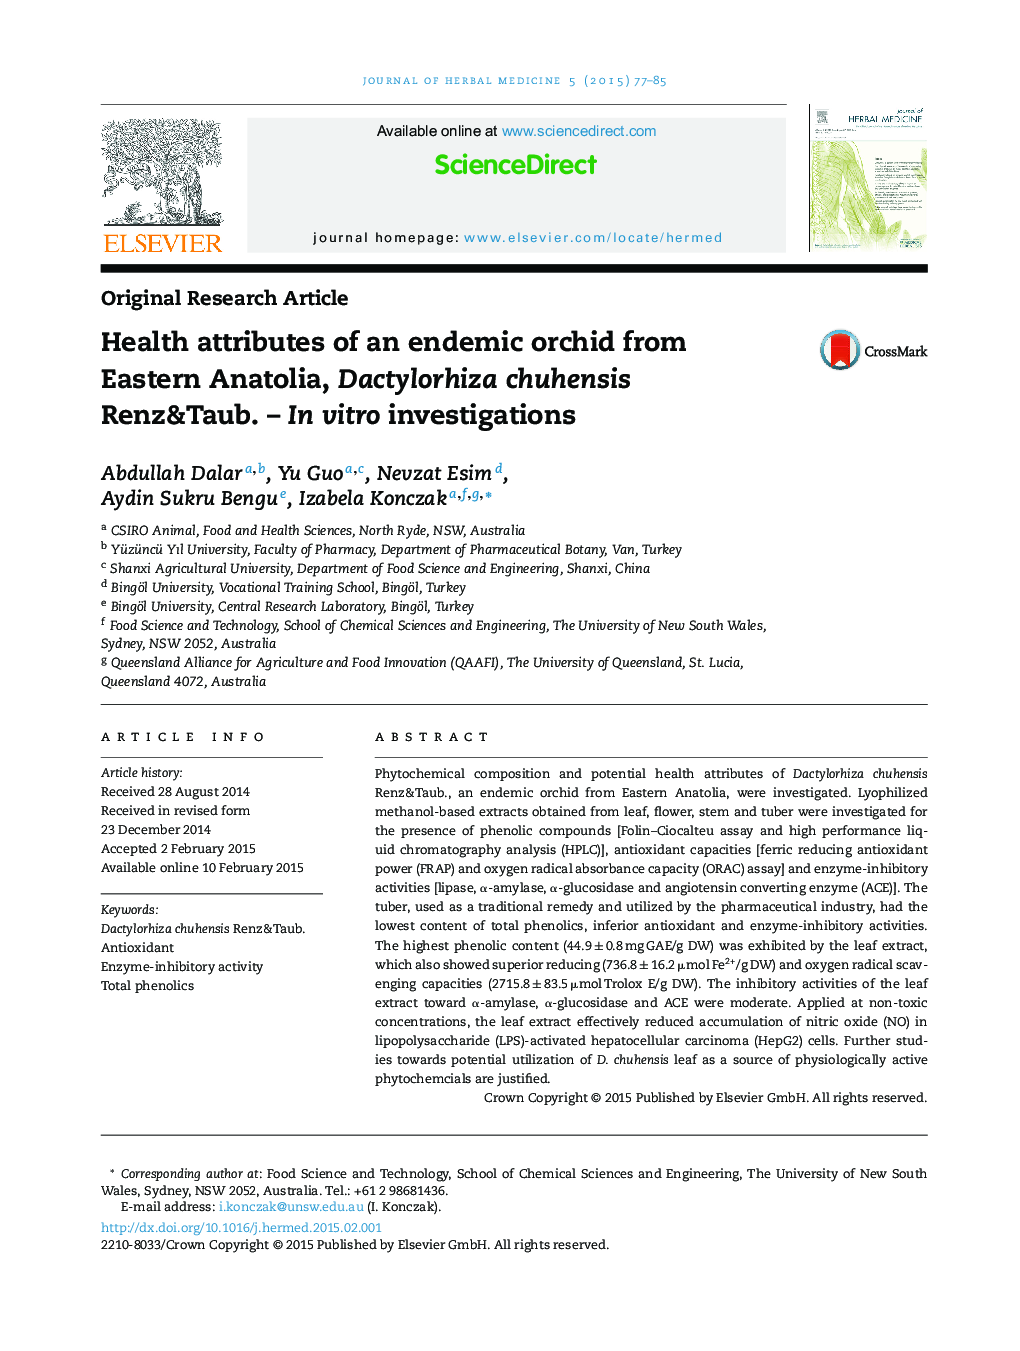 Health attributes of an endemic orchid from Eastern Anatolia, Dactylorhiza chuhensis Renz&Taub. – In vitro investigations